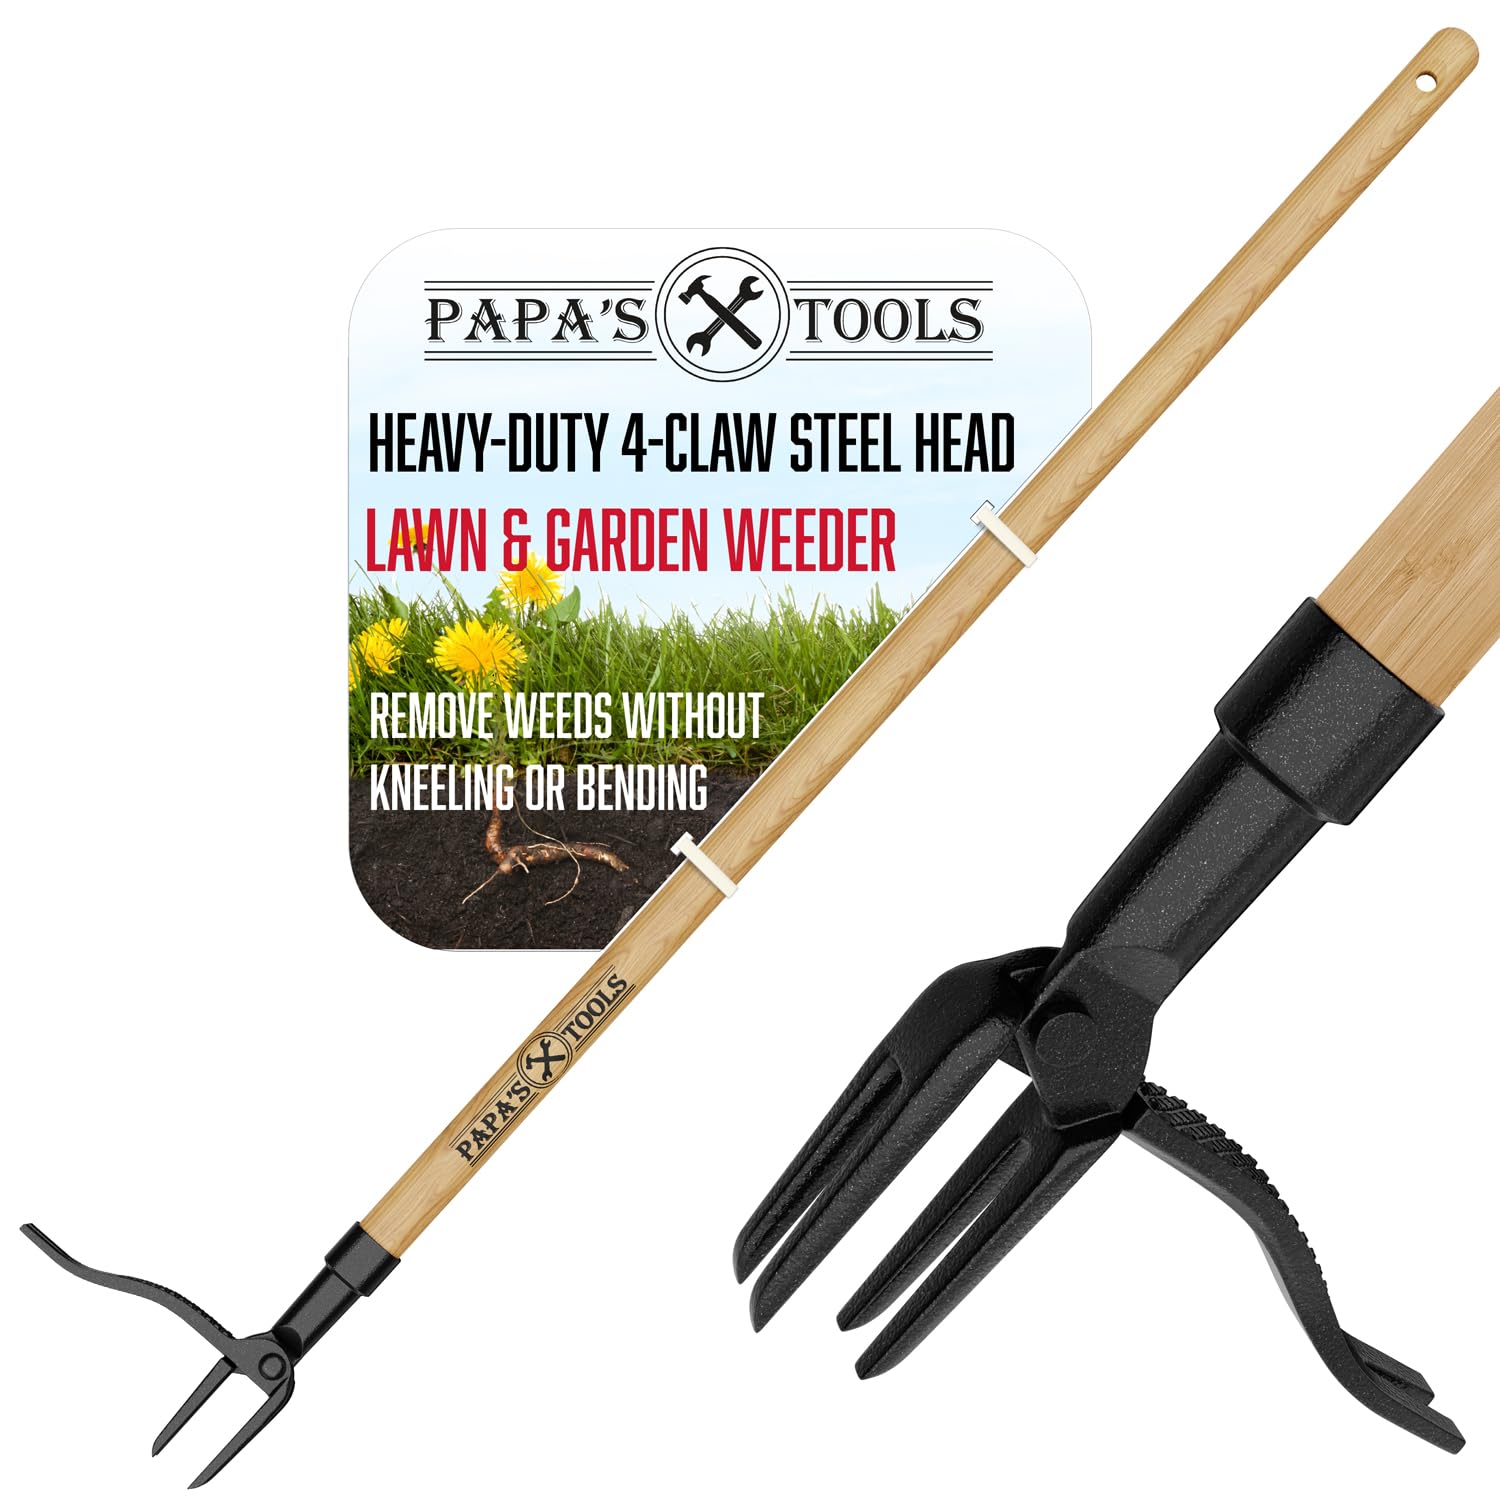 Papa's Weeder - Stand Up Weed Puller Tool Made with Long Wooden Handle - Real Bamboo & 4-Claw Steel Head - Easly Remove Weeds Effortlessly Without The Need to Tug, Bend, Or Flex,